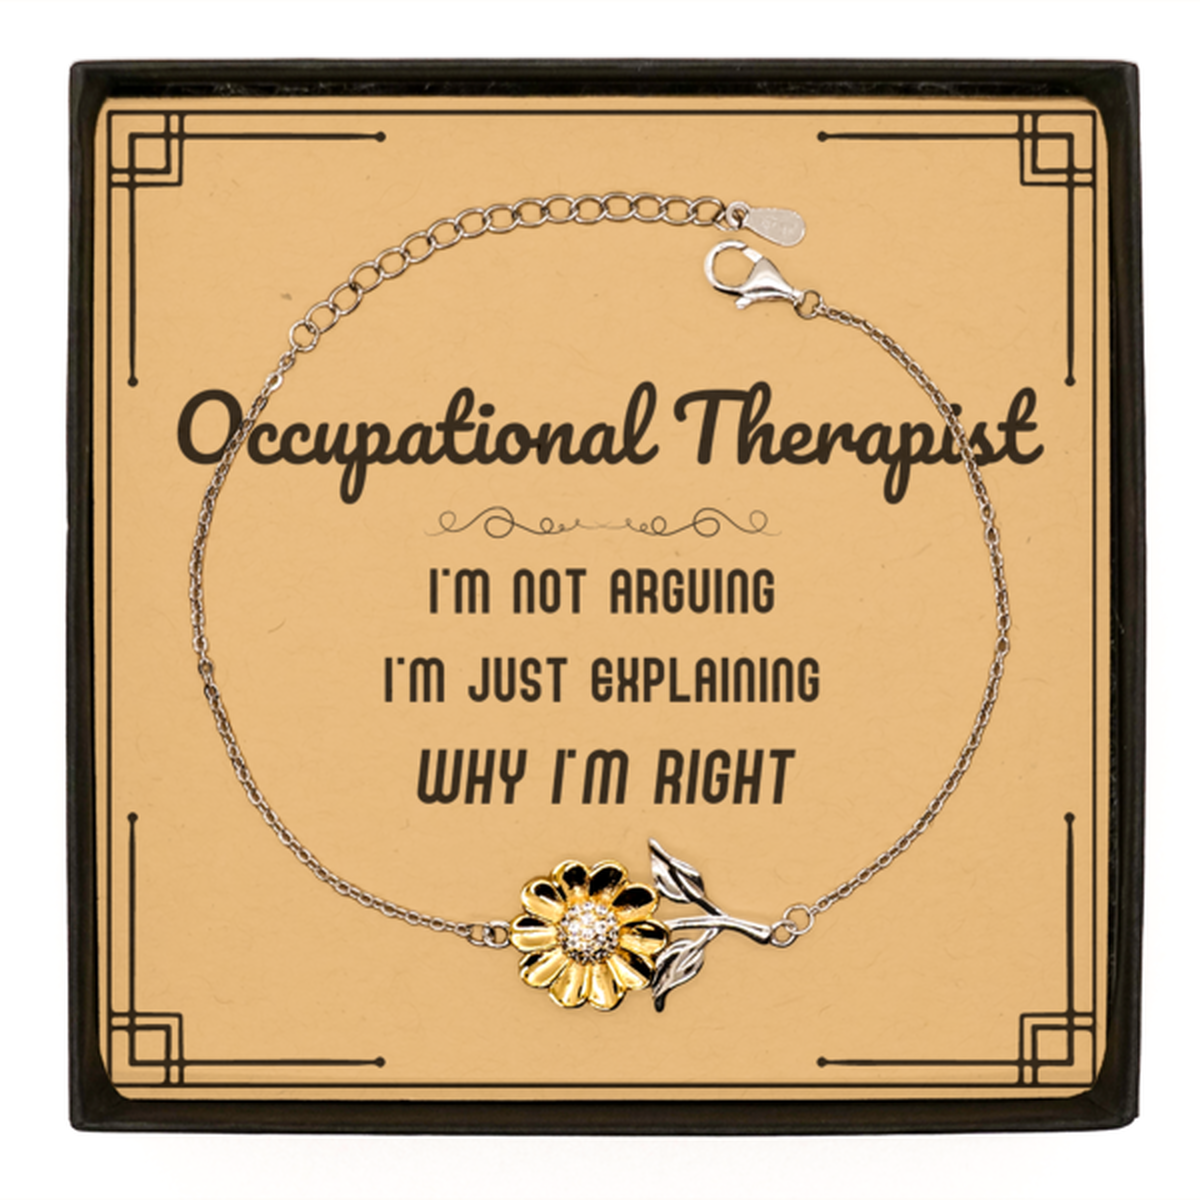 Occupational Therapist I'm not Arguing. I'm Just Explaining Why I'm RIGHT Sunflower Bracelet, Funny Saying Quote Occupational Therapist Gifts For Occupational Therapist Message Card Graduation Birthday Christmas Gifts for Men Women Coworker